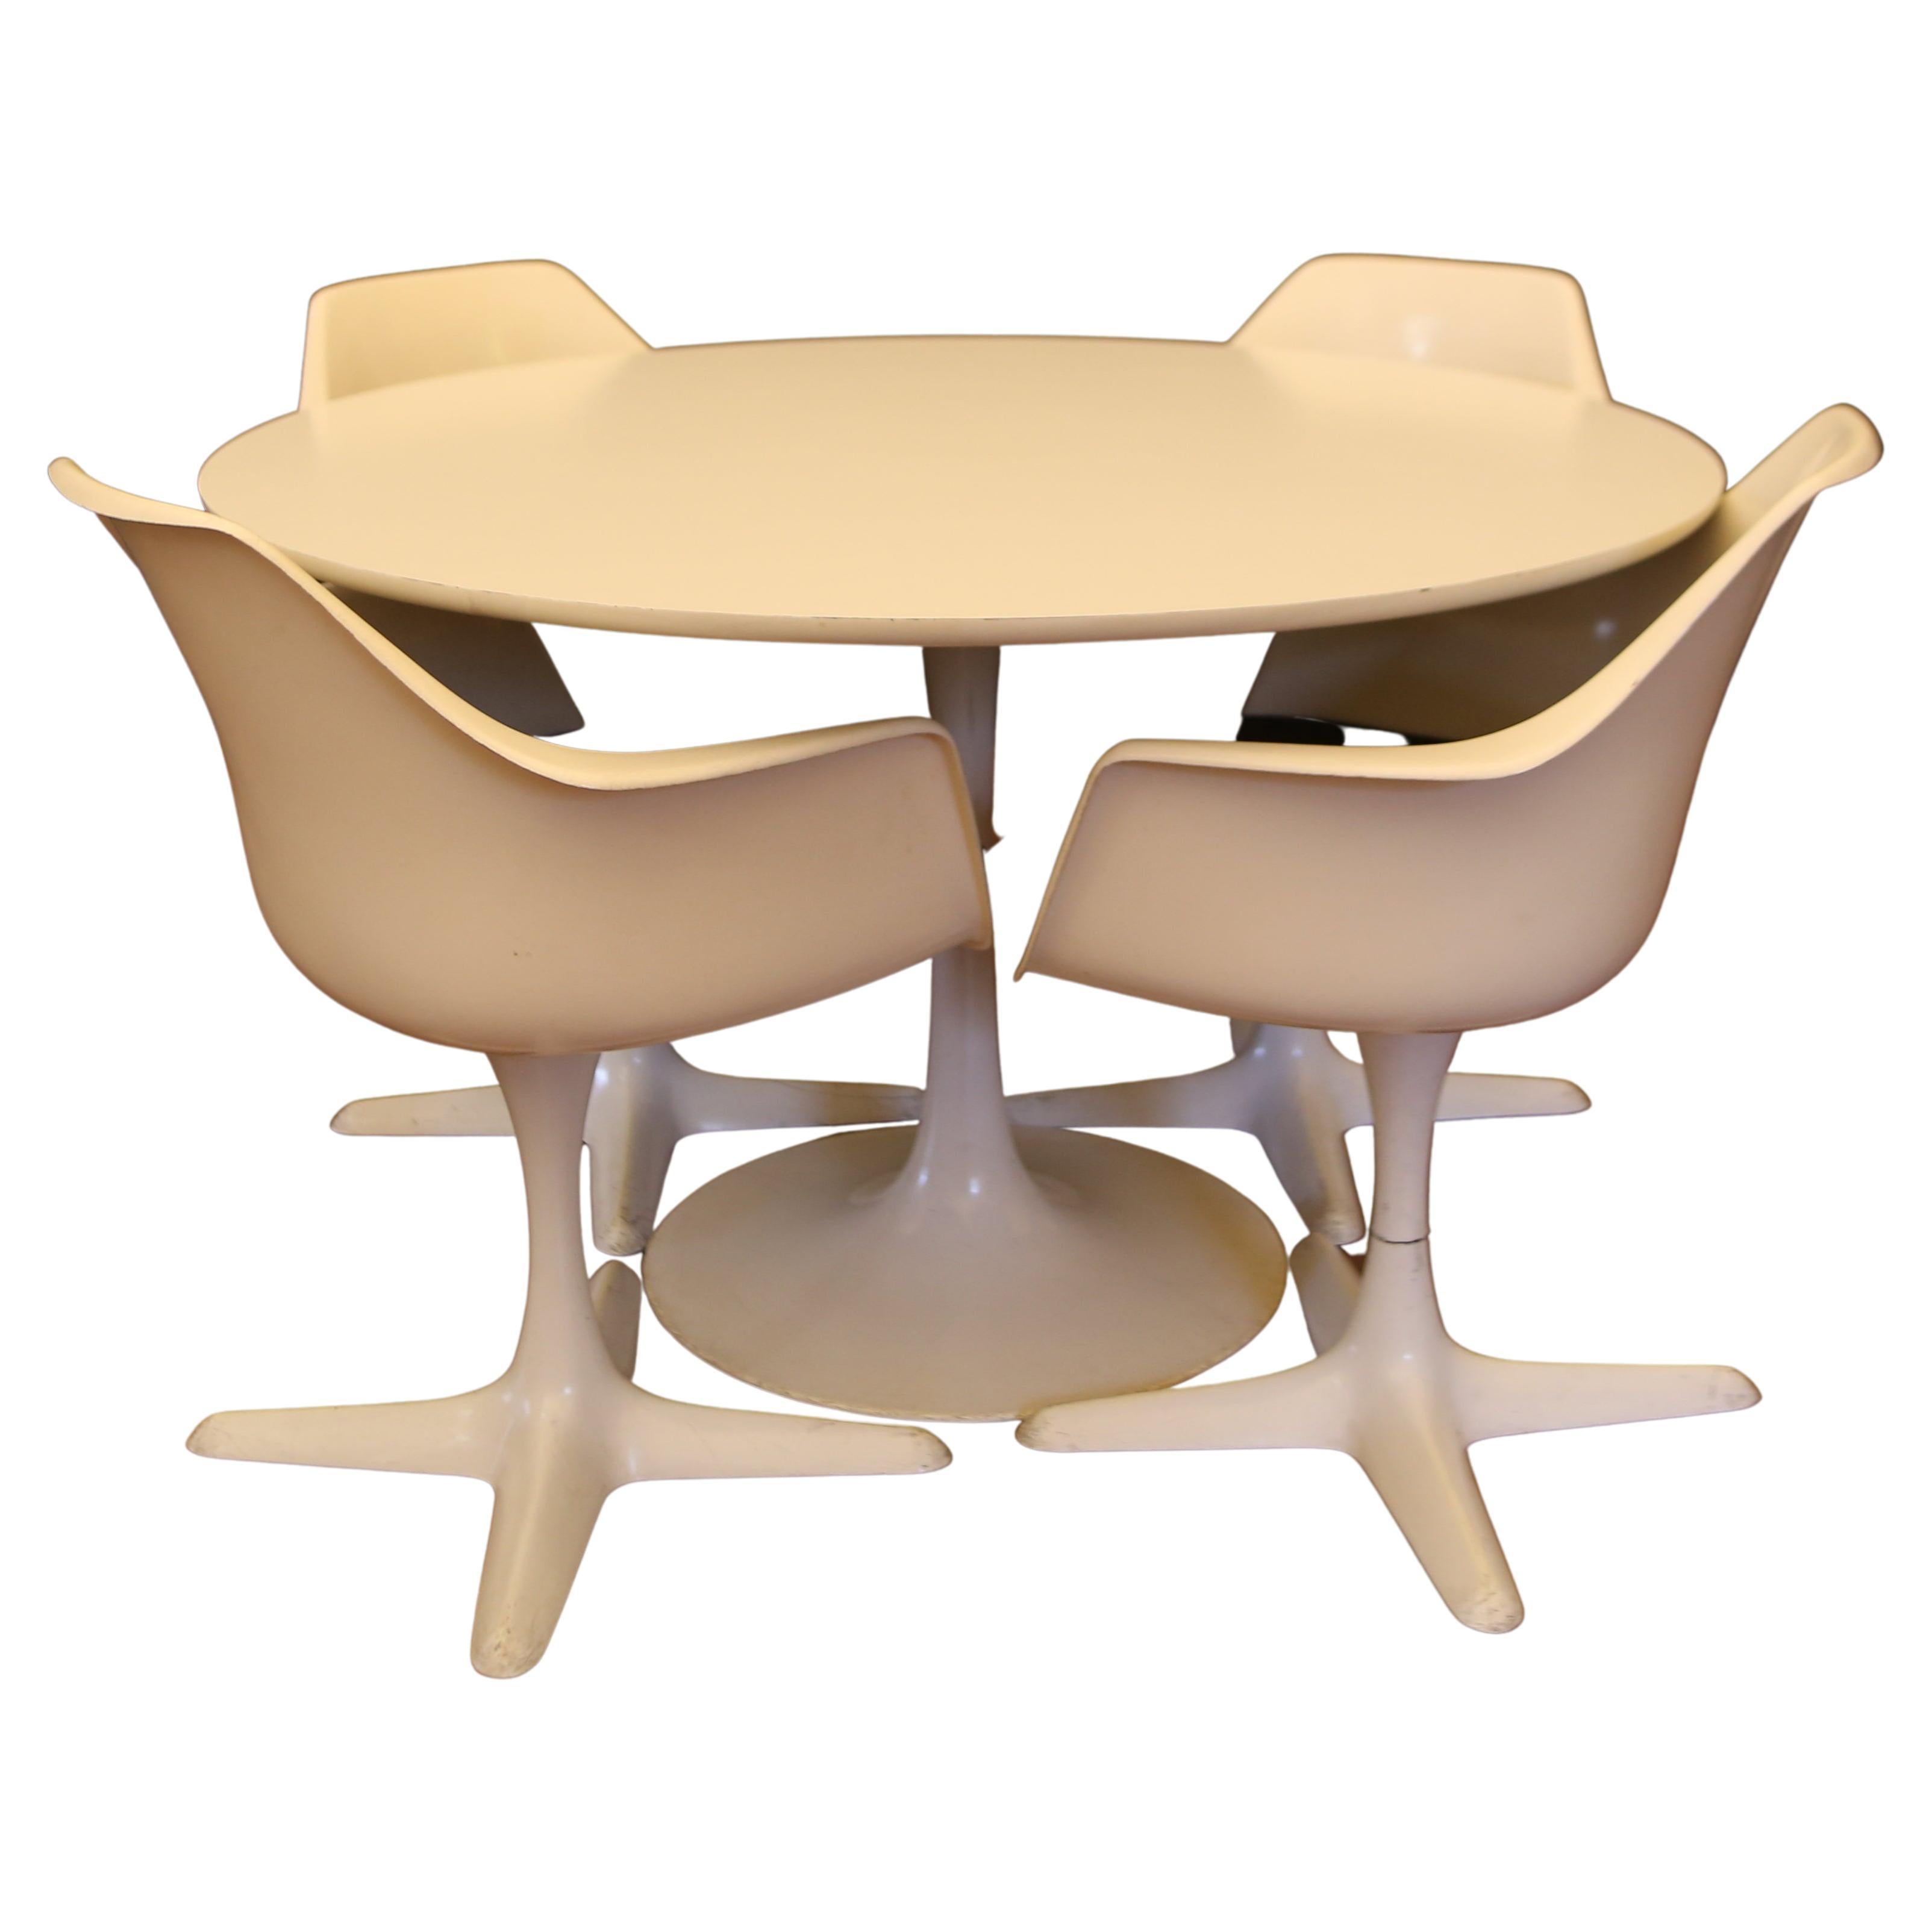 Maurice Burke Tulip table with chairs from the 60s "ARKANA" production